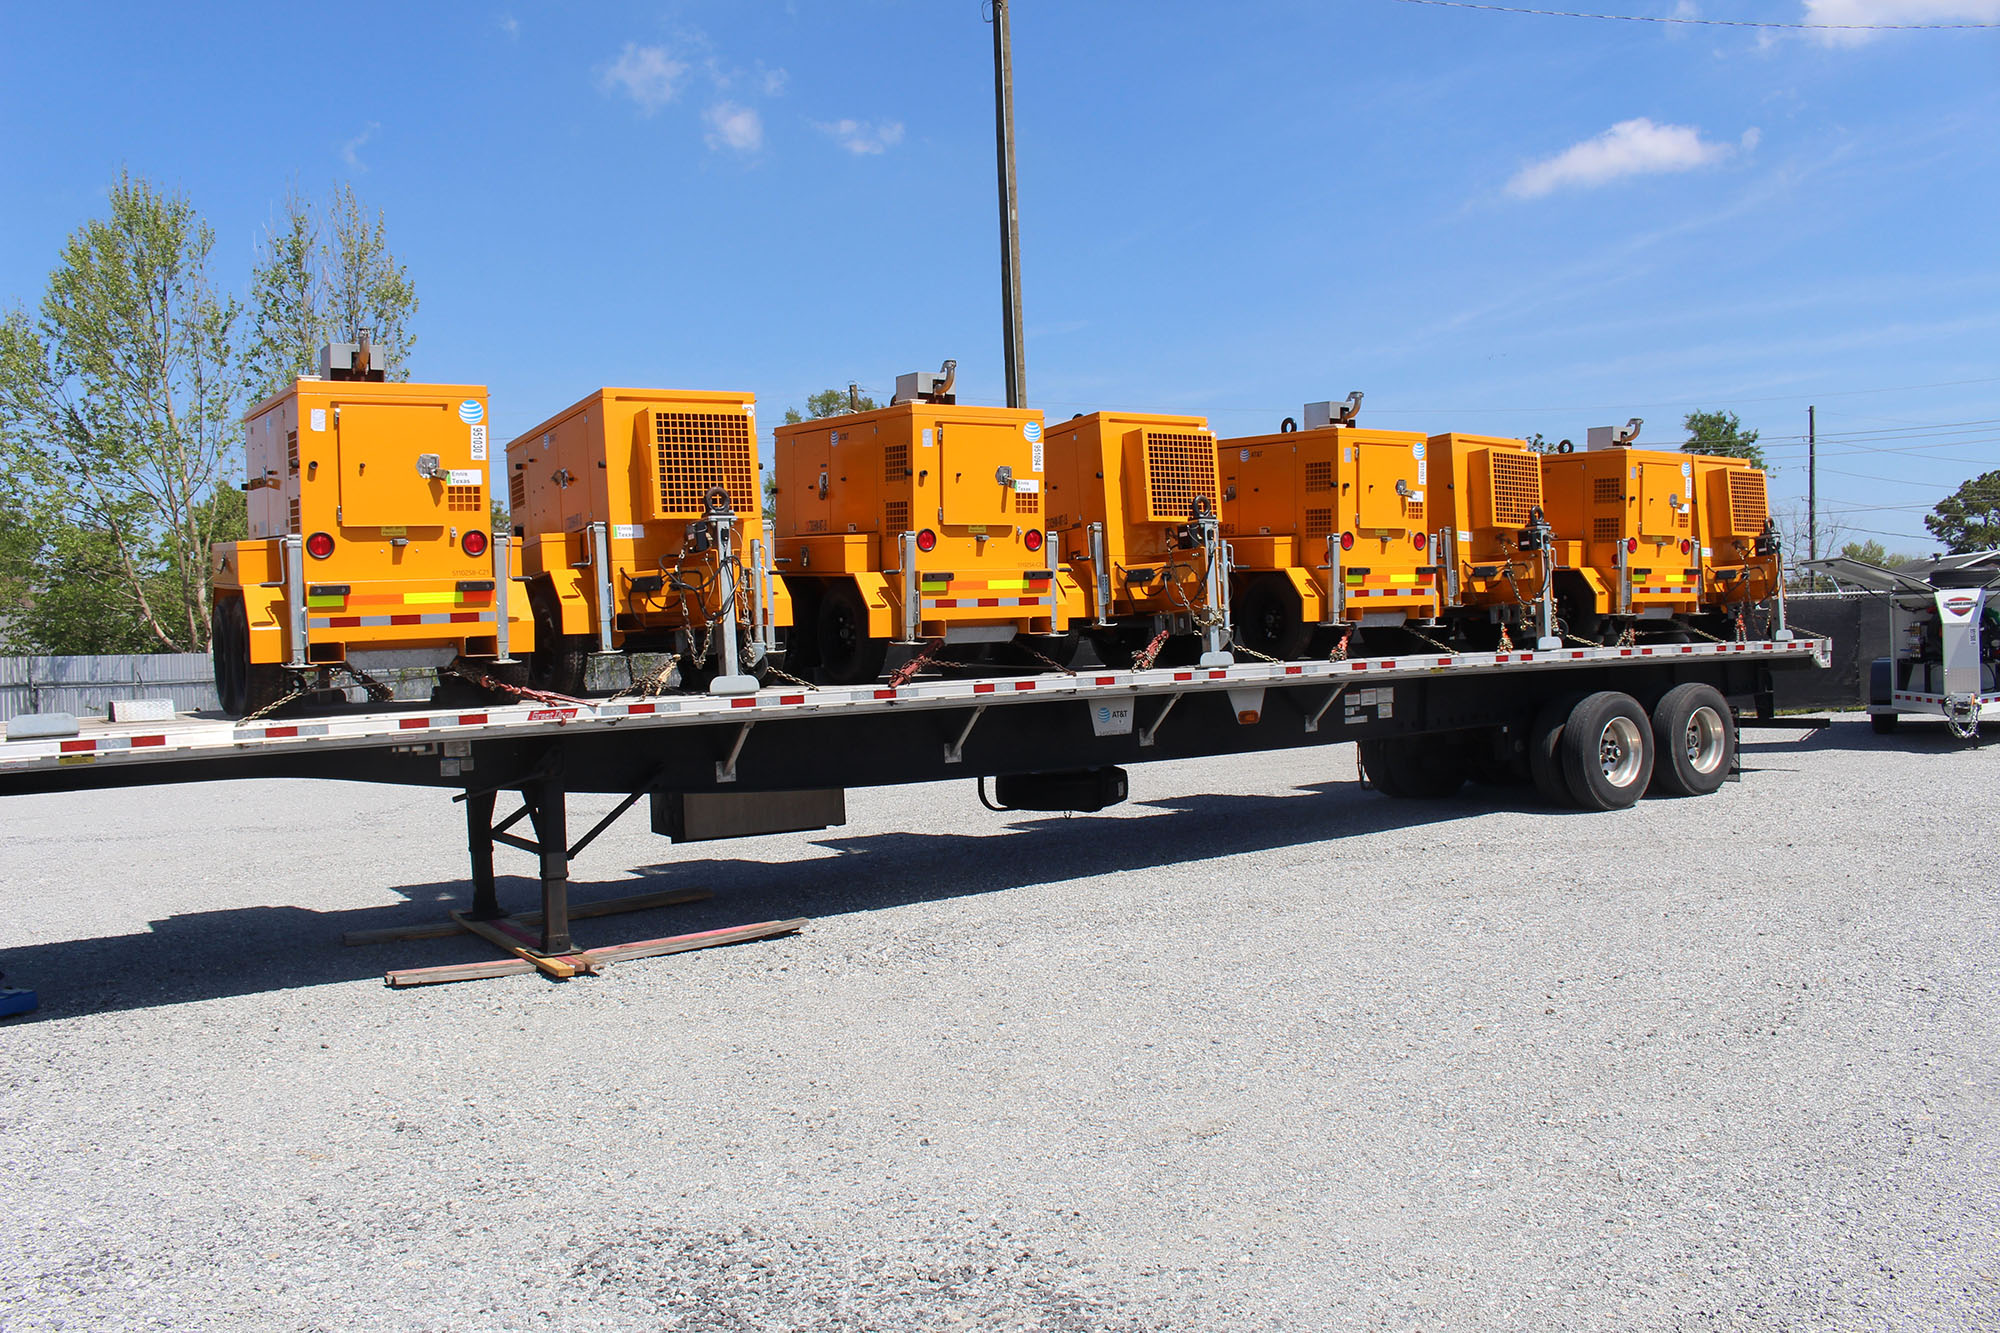 Power generators loaded onto a flatbed trailer.